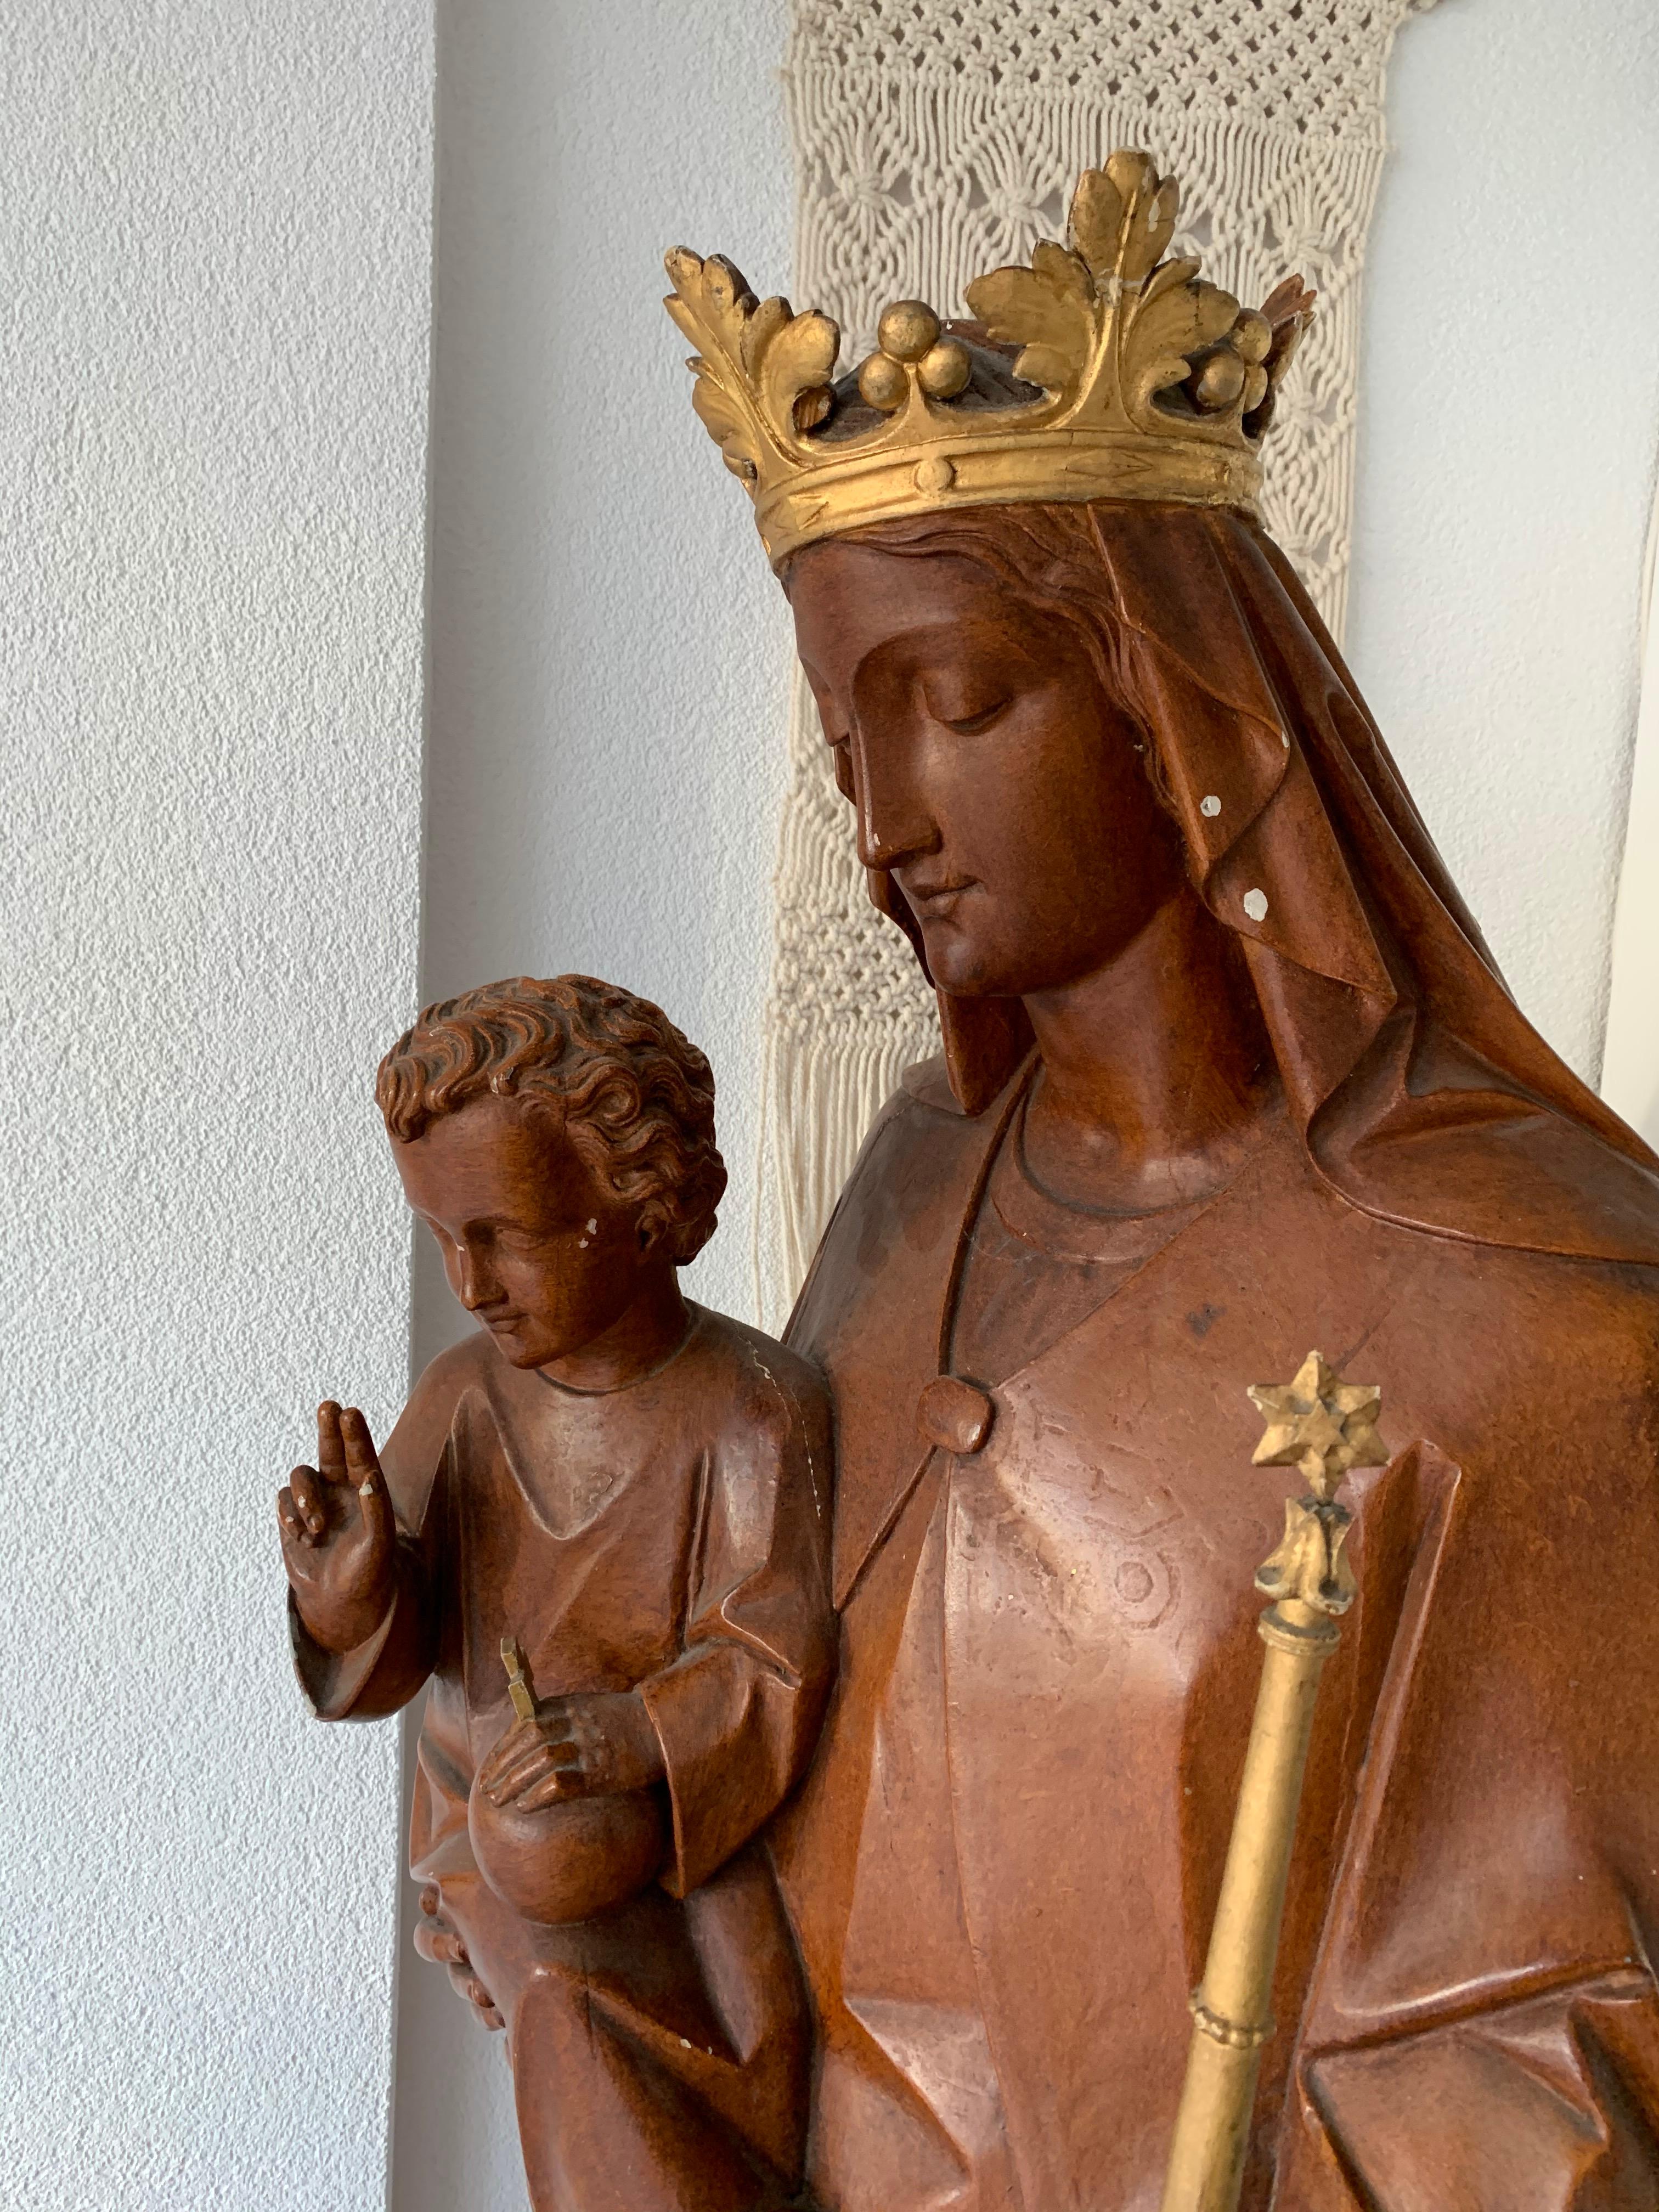 Antique Lifesize Crowned Mother Mary and Child Jesus Gothic Revival Sculpture For Sale 2